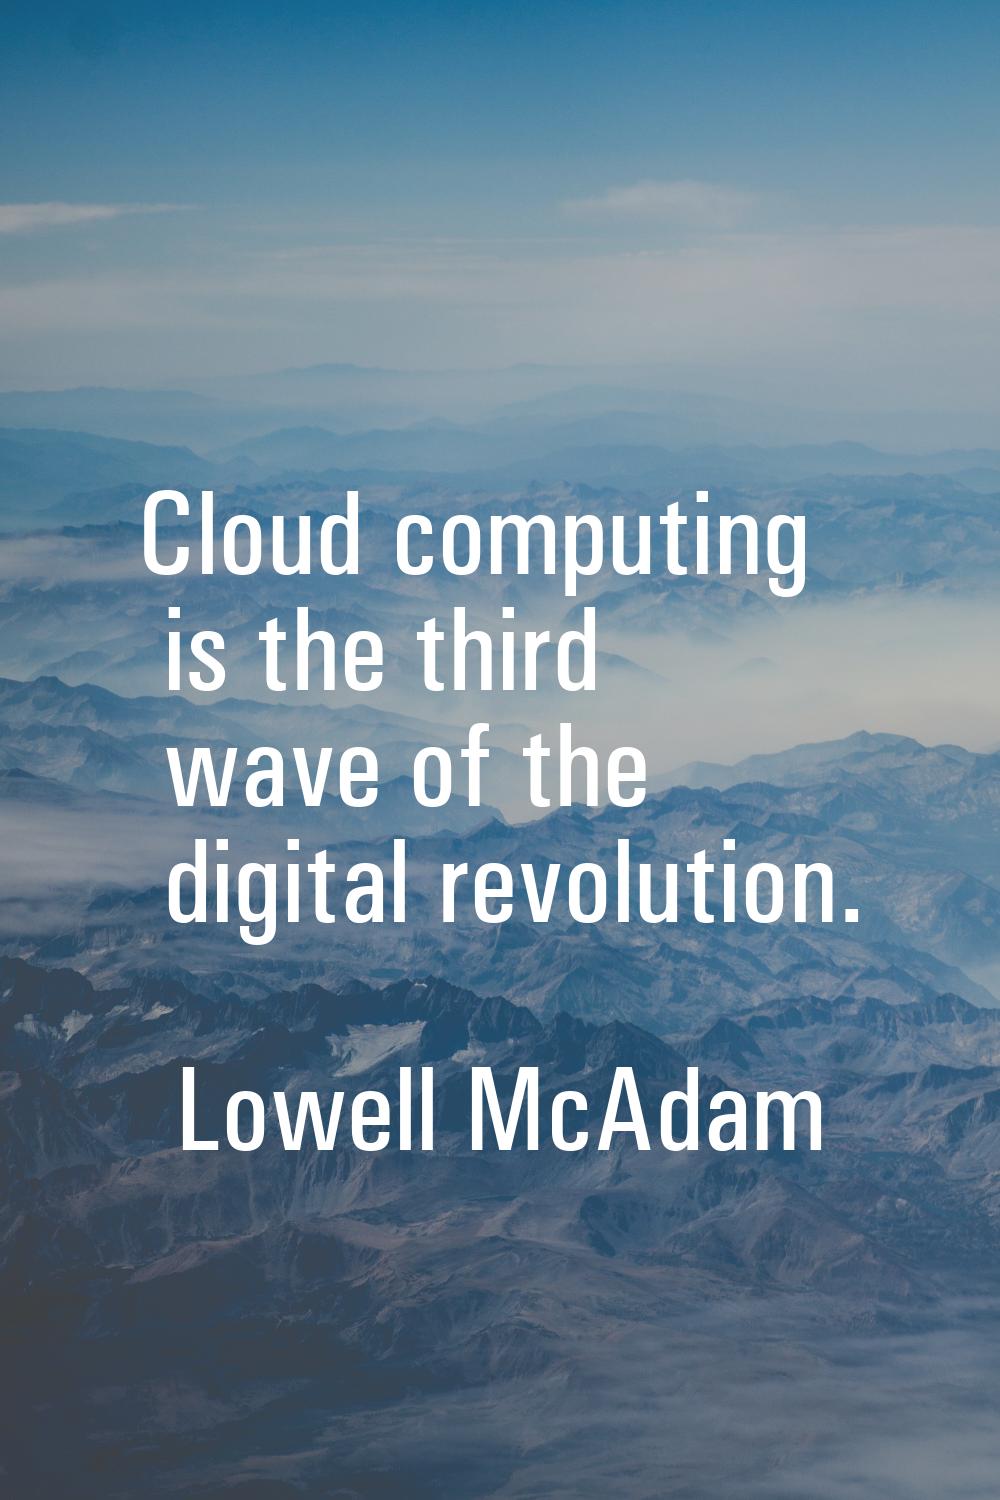 Cloud computing is the third wave of the digital revolution.